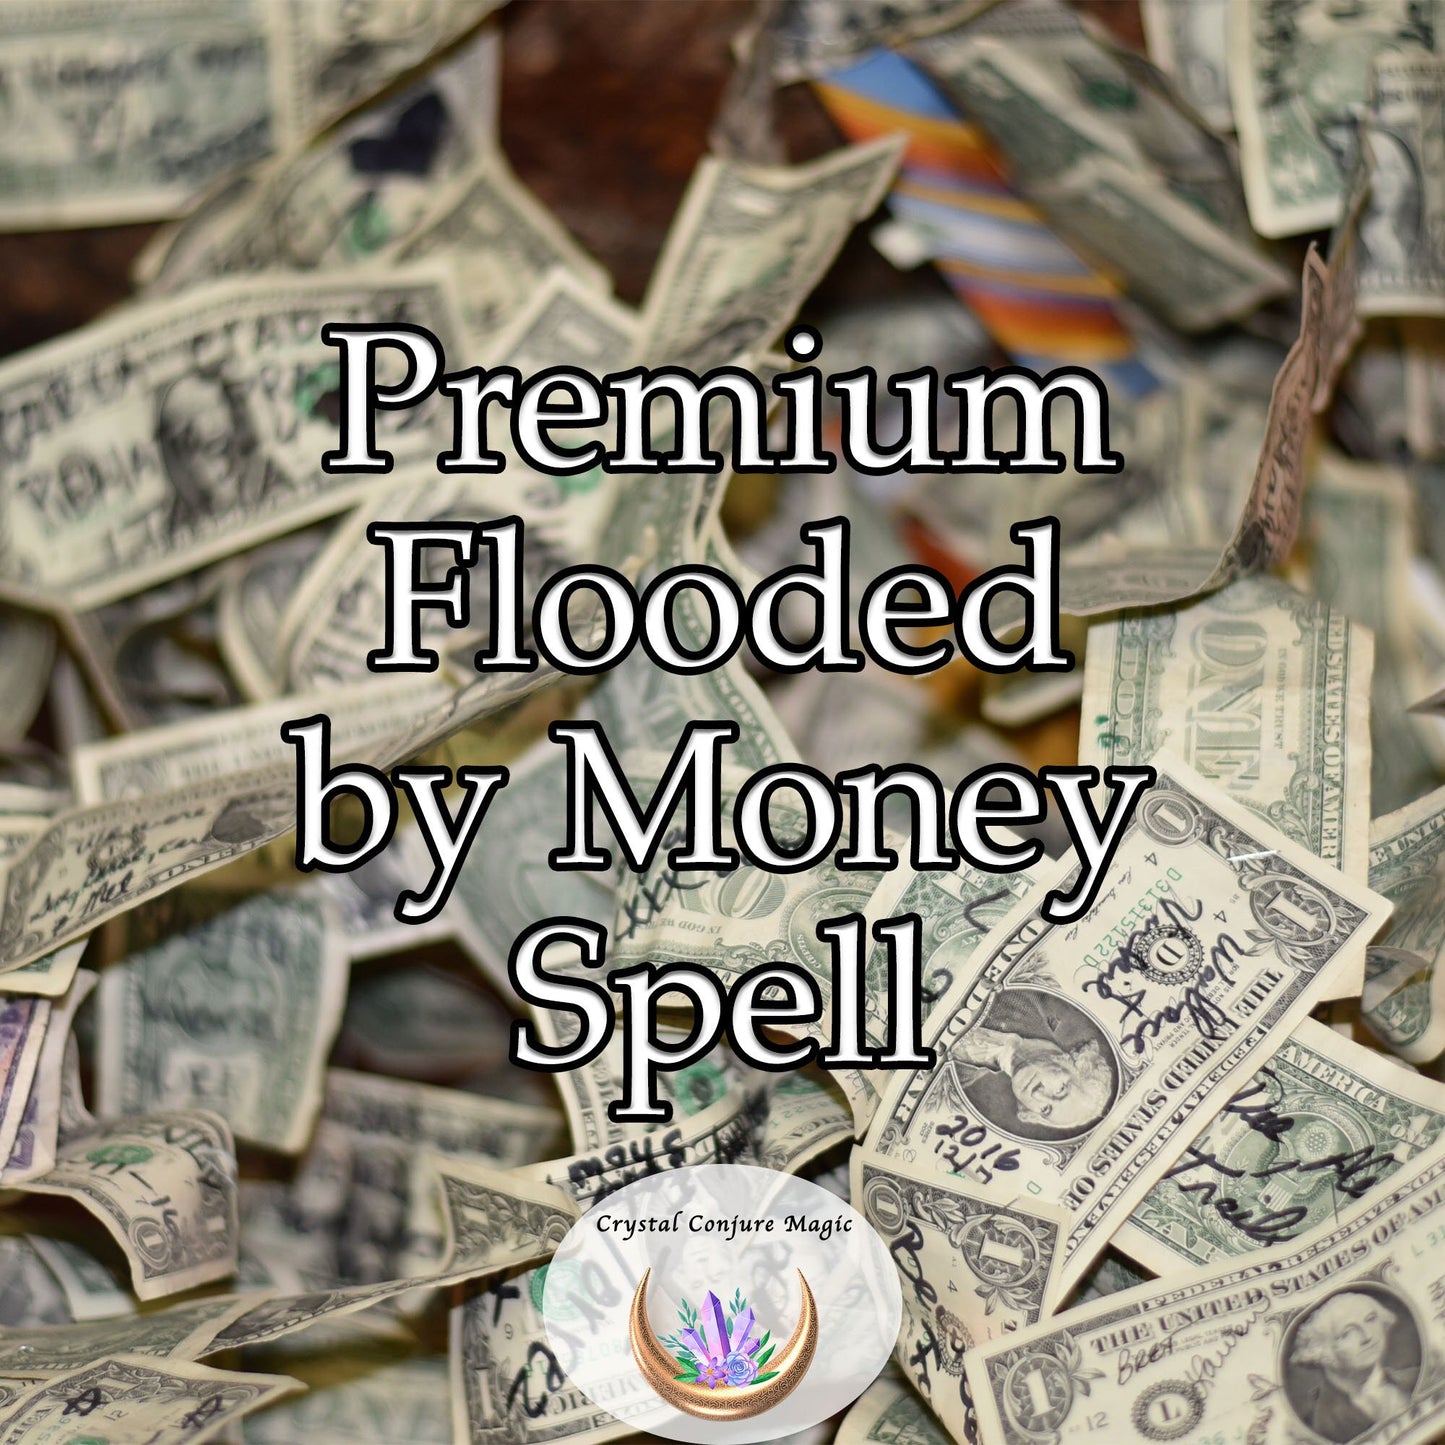 Premium Flooded by Money Spell - Keep the money flowing to you and pay your bills and live comfortably